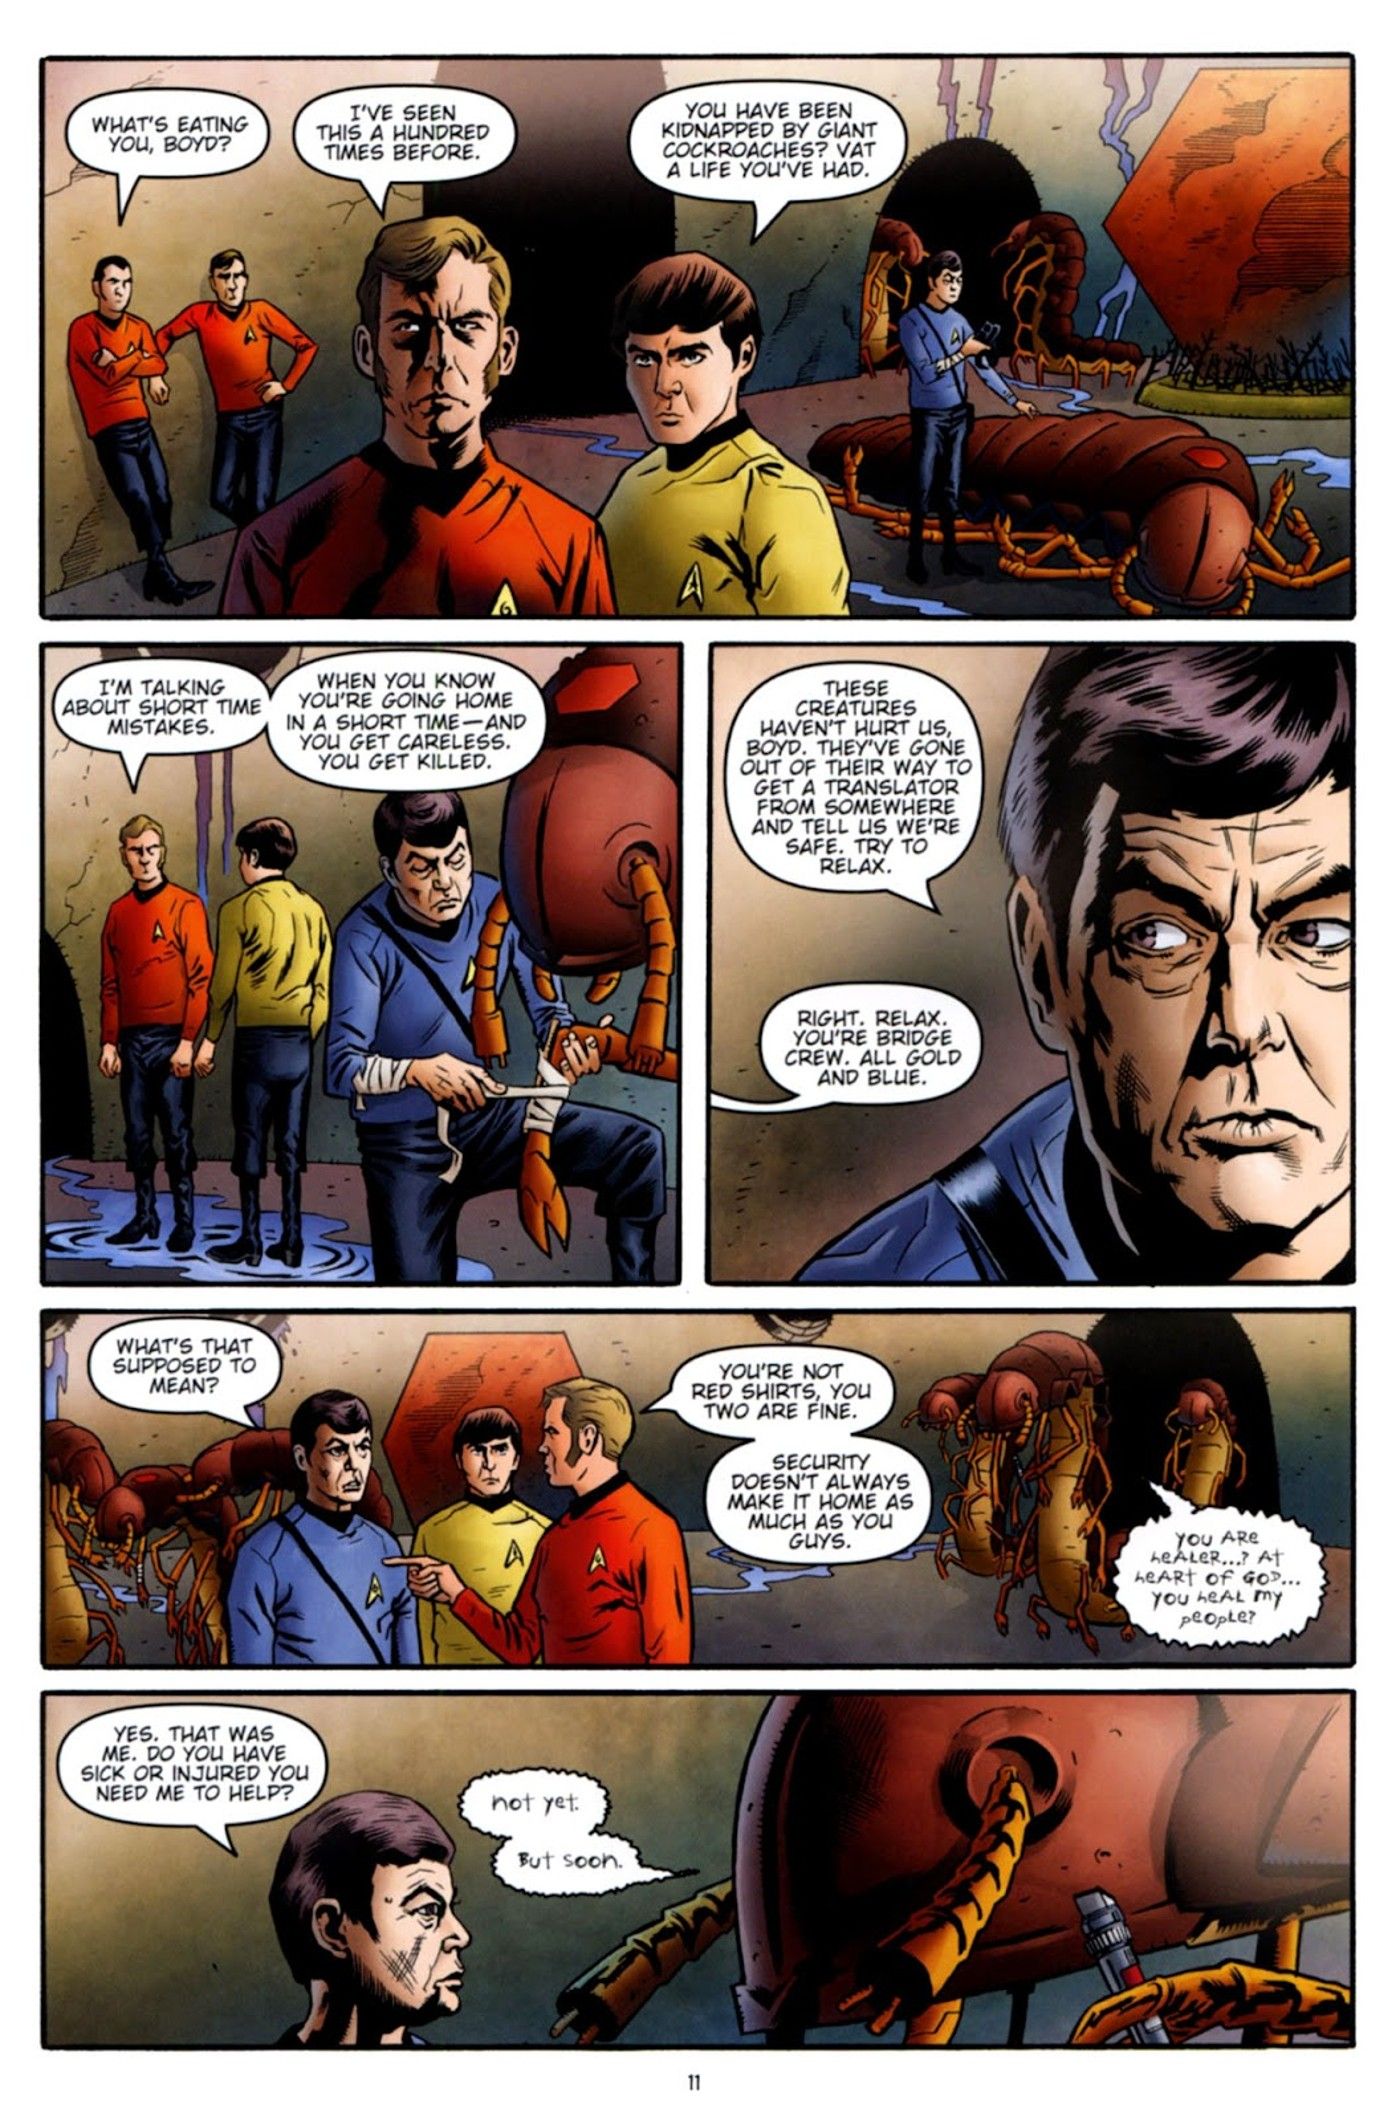 Five panels of a red shirt explaining to McCoy and Chekov why they do not come back from missions as often as others.